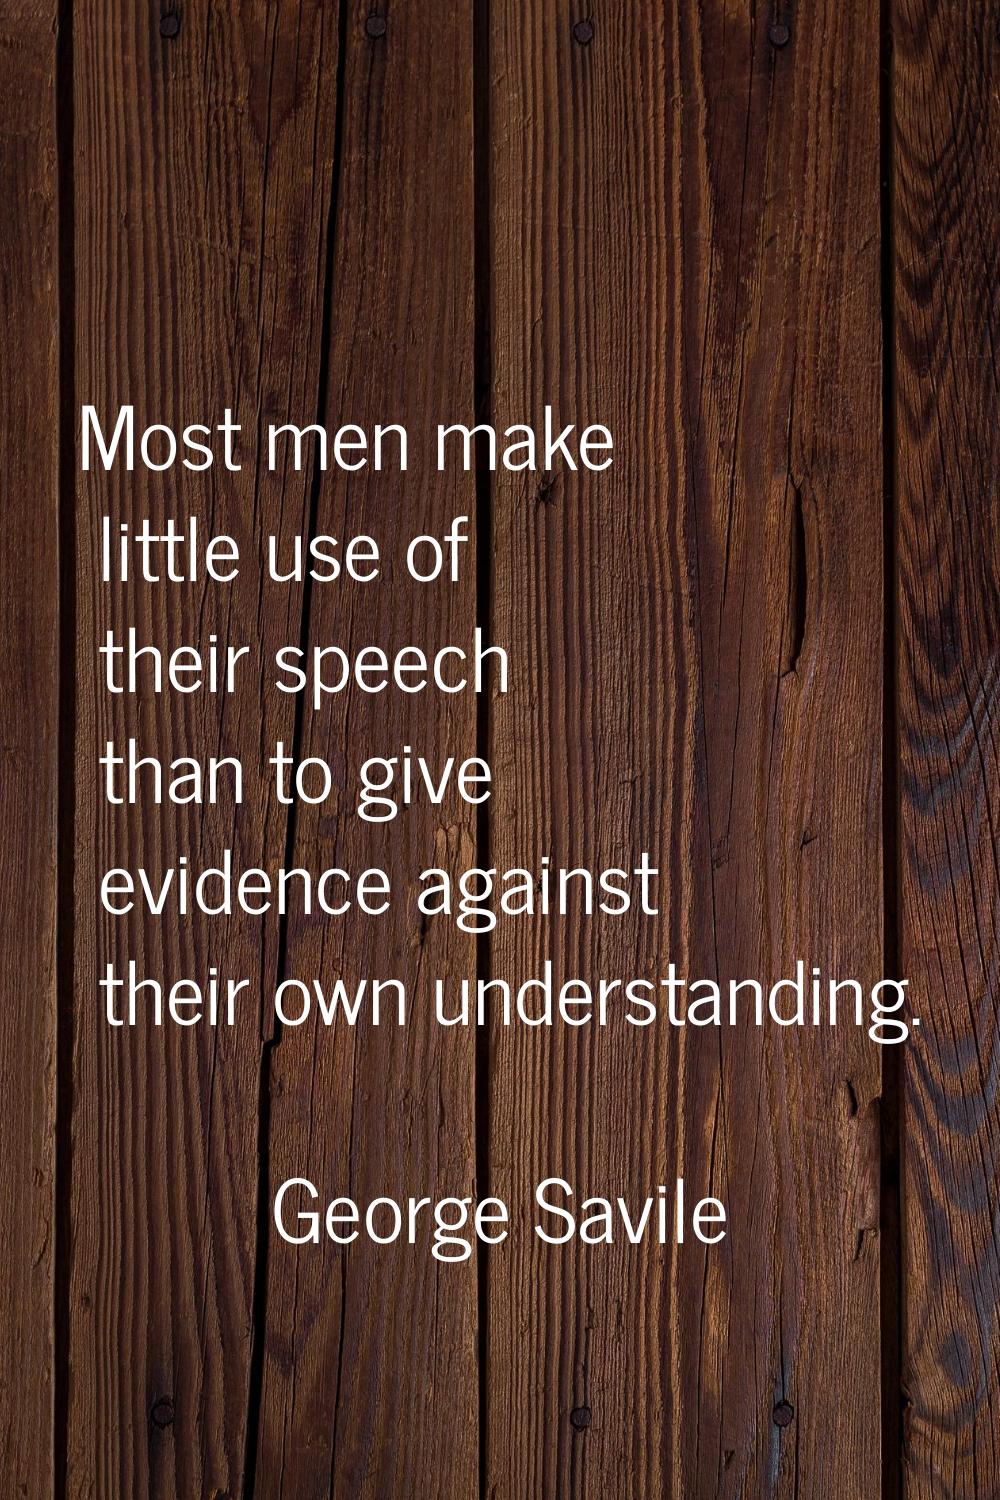 Most men make little use of their speech than to give evidence against their own understanding.